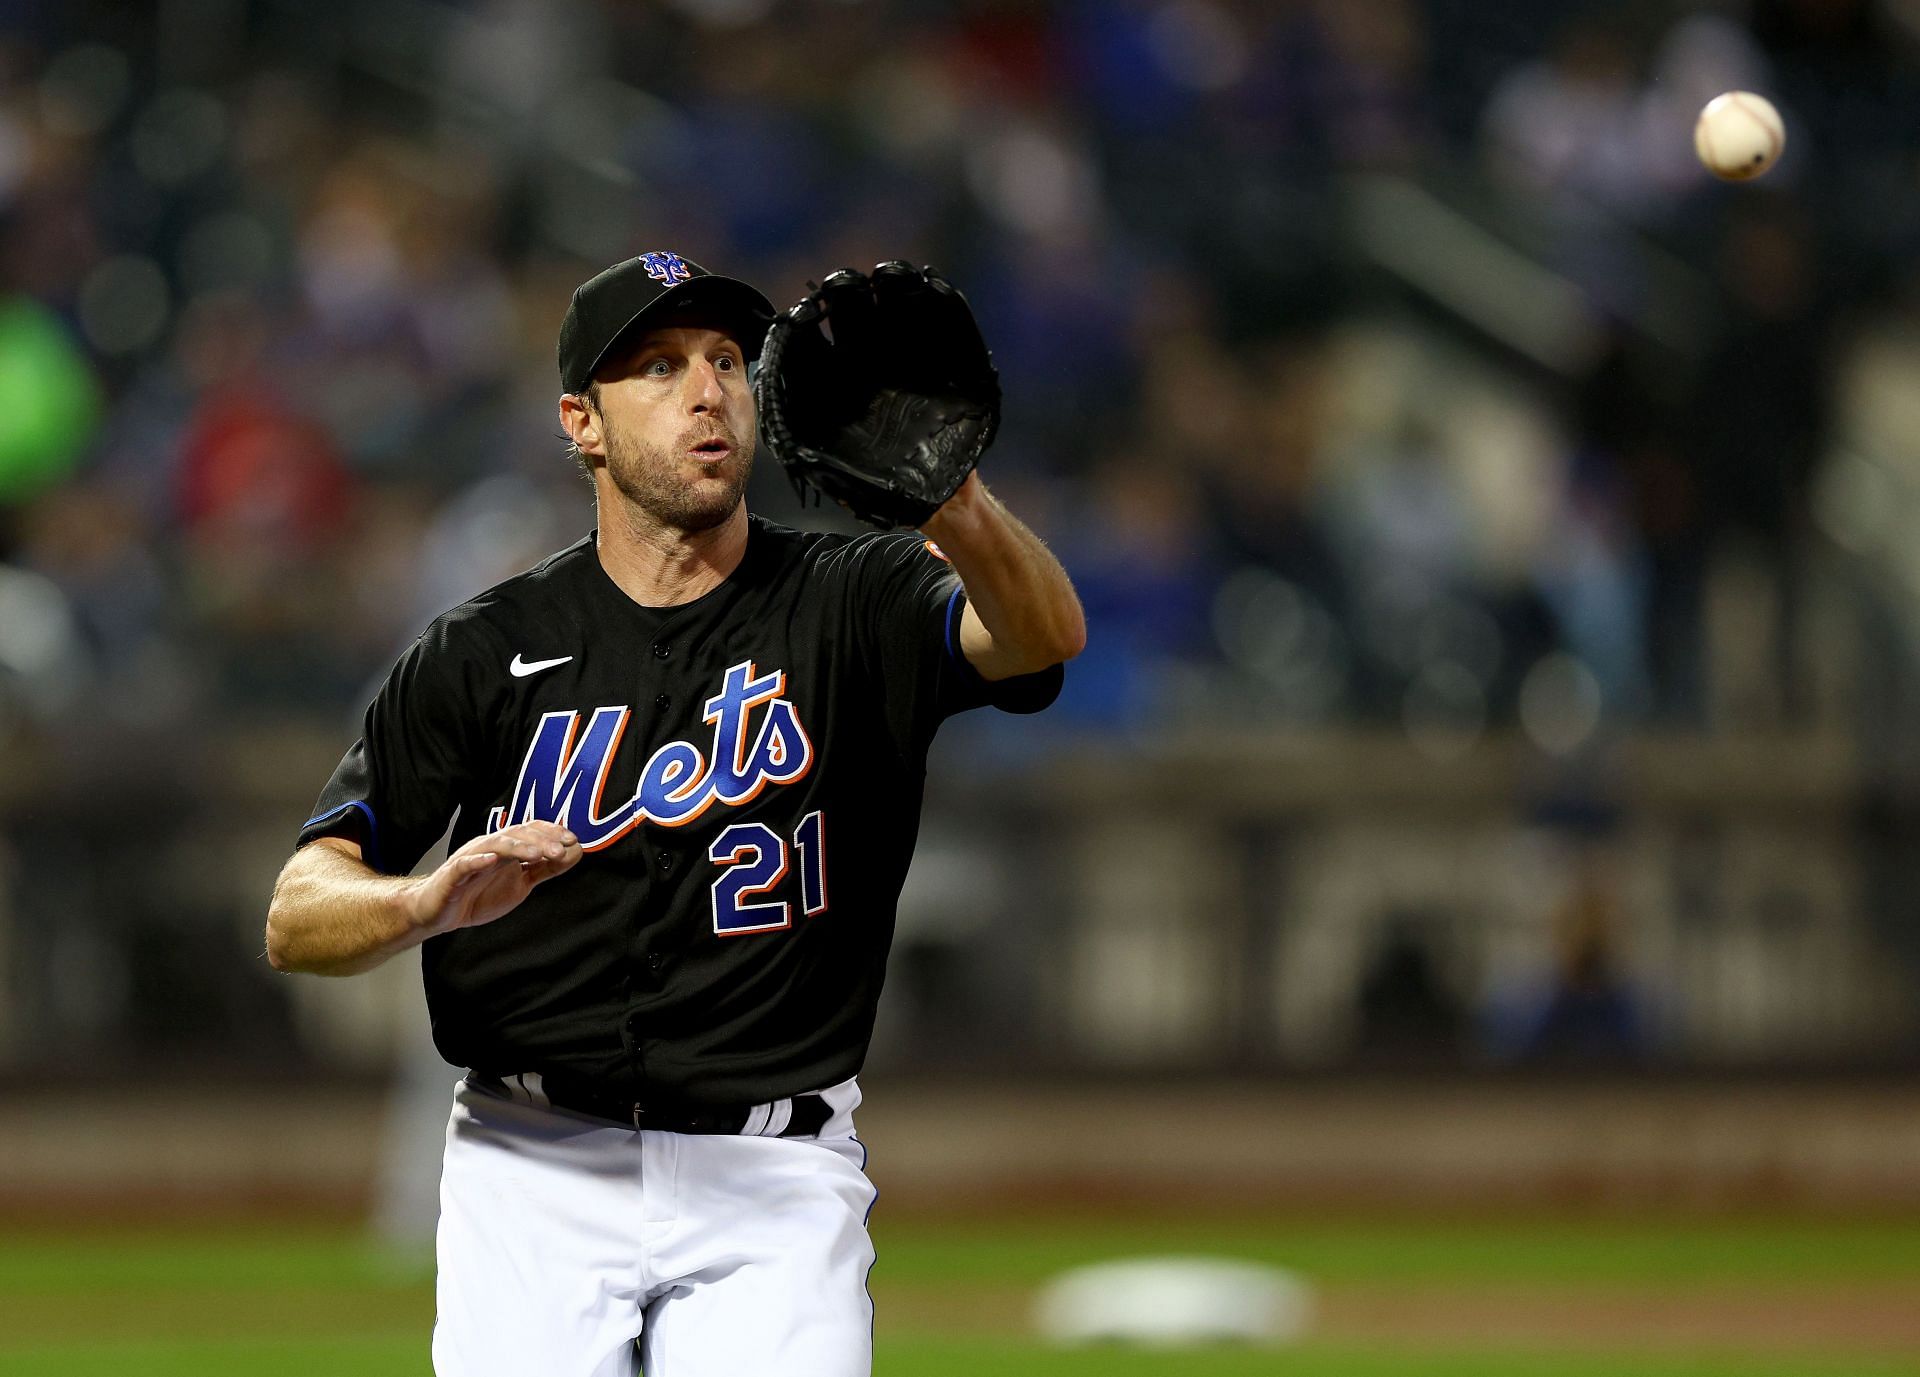 Max Scherzer of the New York Mets gets the out at first against the Seattle Mariners